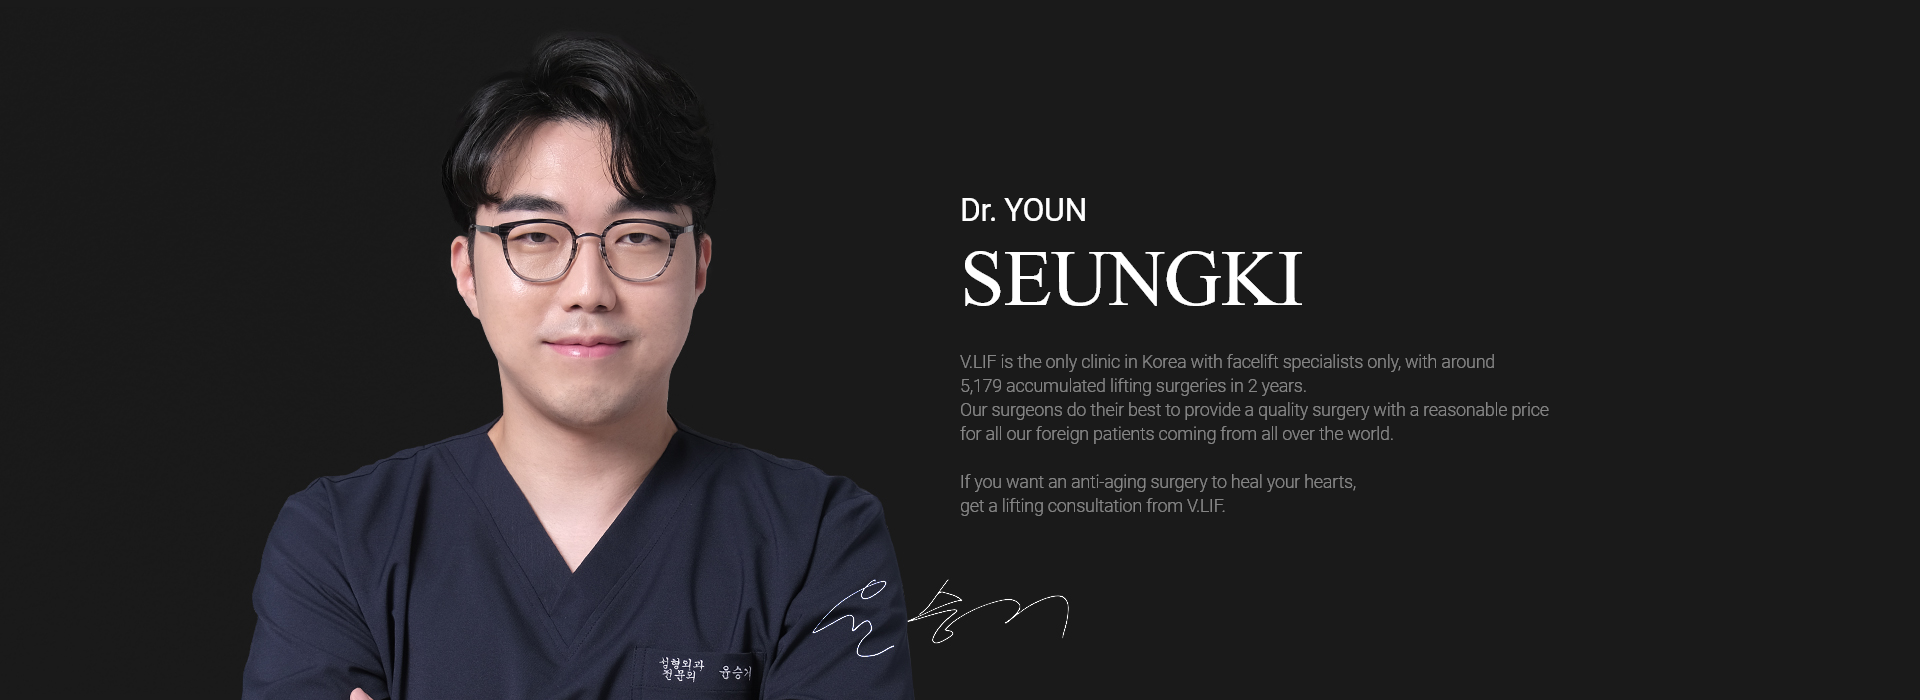 Dr. YOUN SEUNG KI V.LIF is the only clinic in Korea with facelift specialists only, with around 2,000 lifting surgeries being performed every year. Our surgeons do their best to provide a quality surgery with a reasonable price for all our foreign patients coming from all over the world. If you want an anti-aging surgery to heal your hearts, get a lifting consultation from V.LIF.